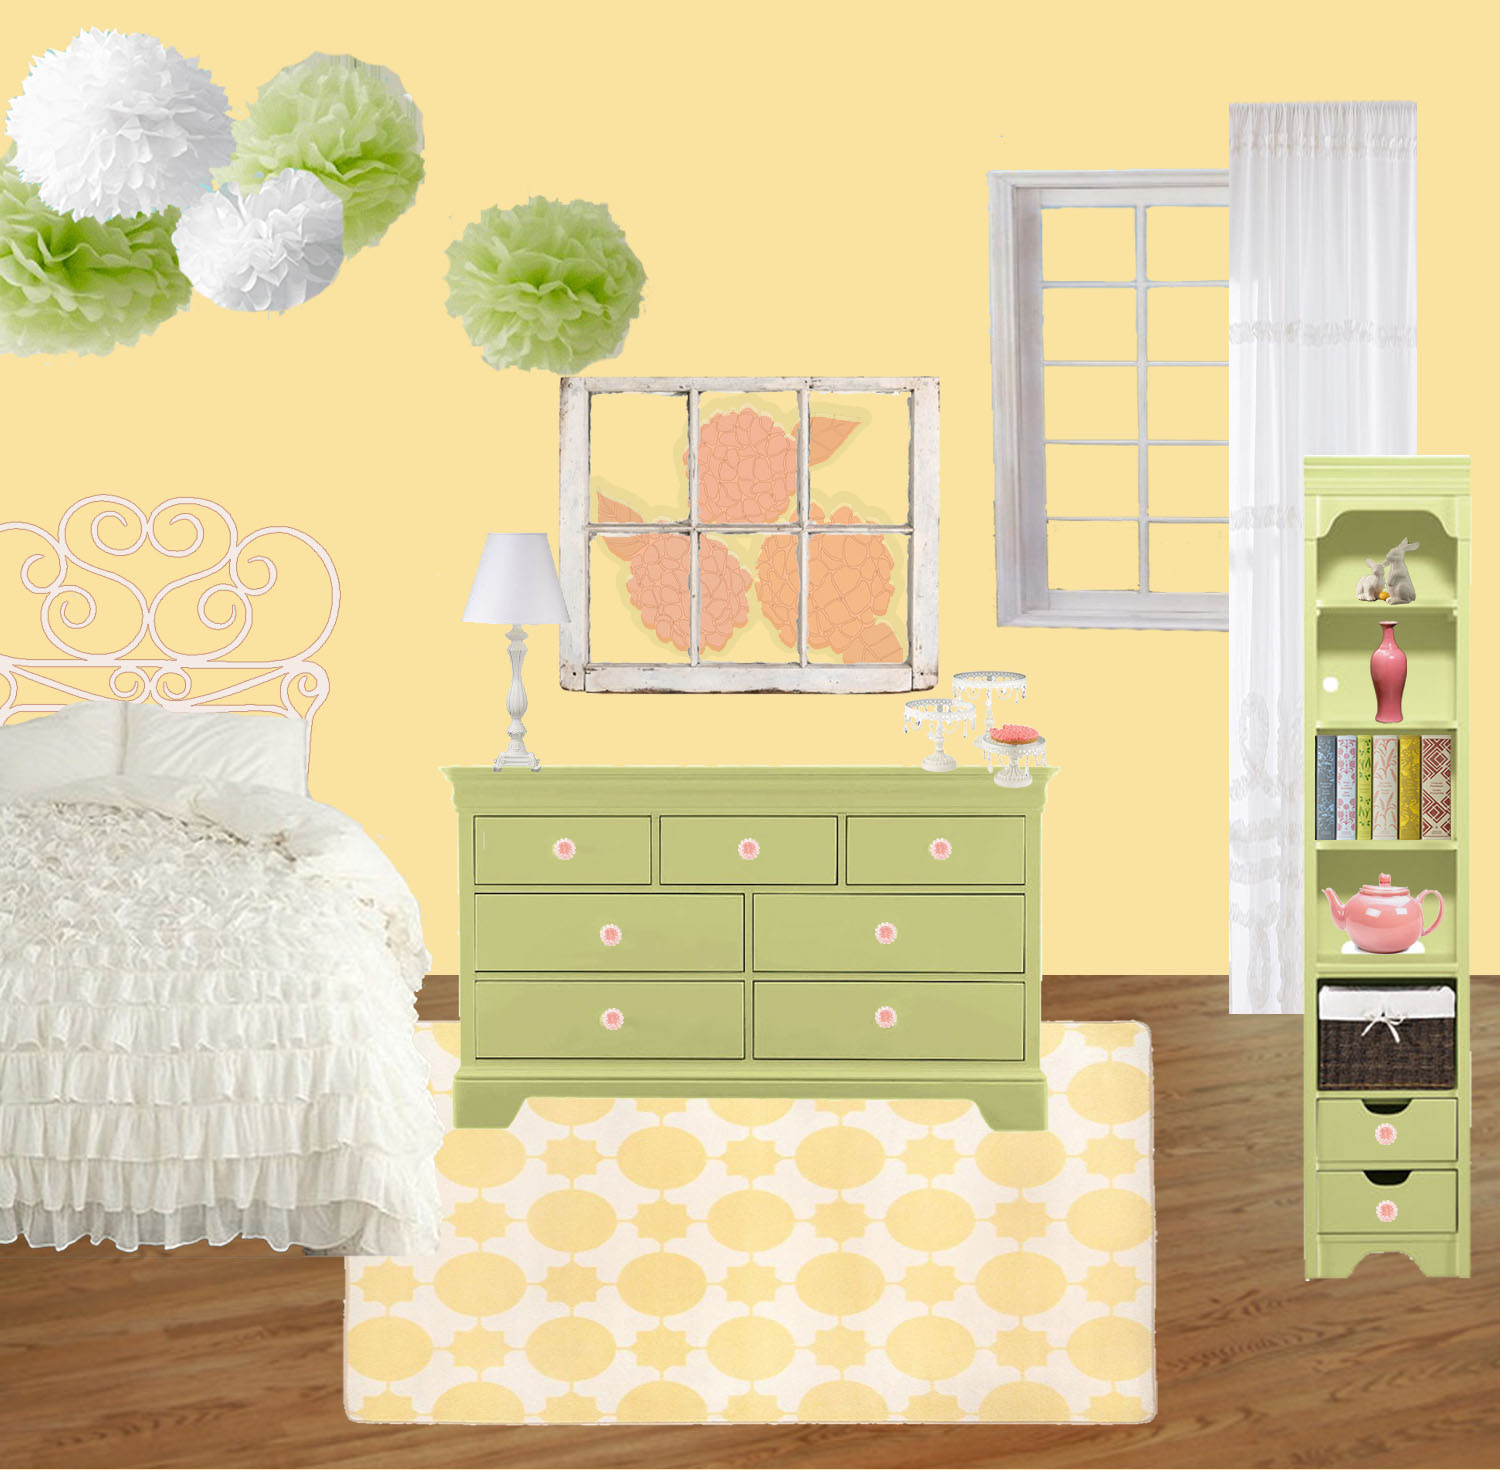 Growing Home: Toddler Girl's Bedroom - Finished!